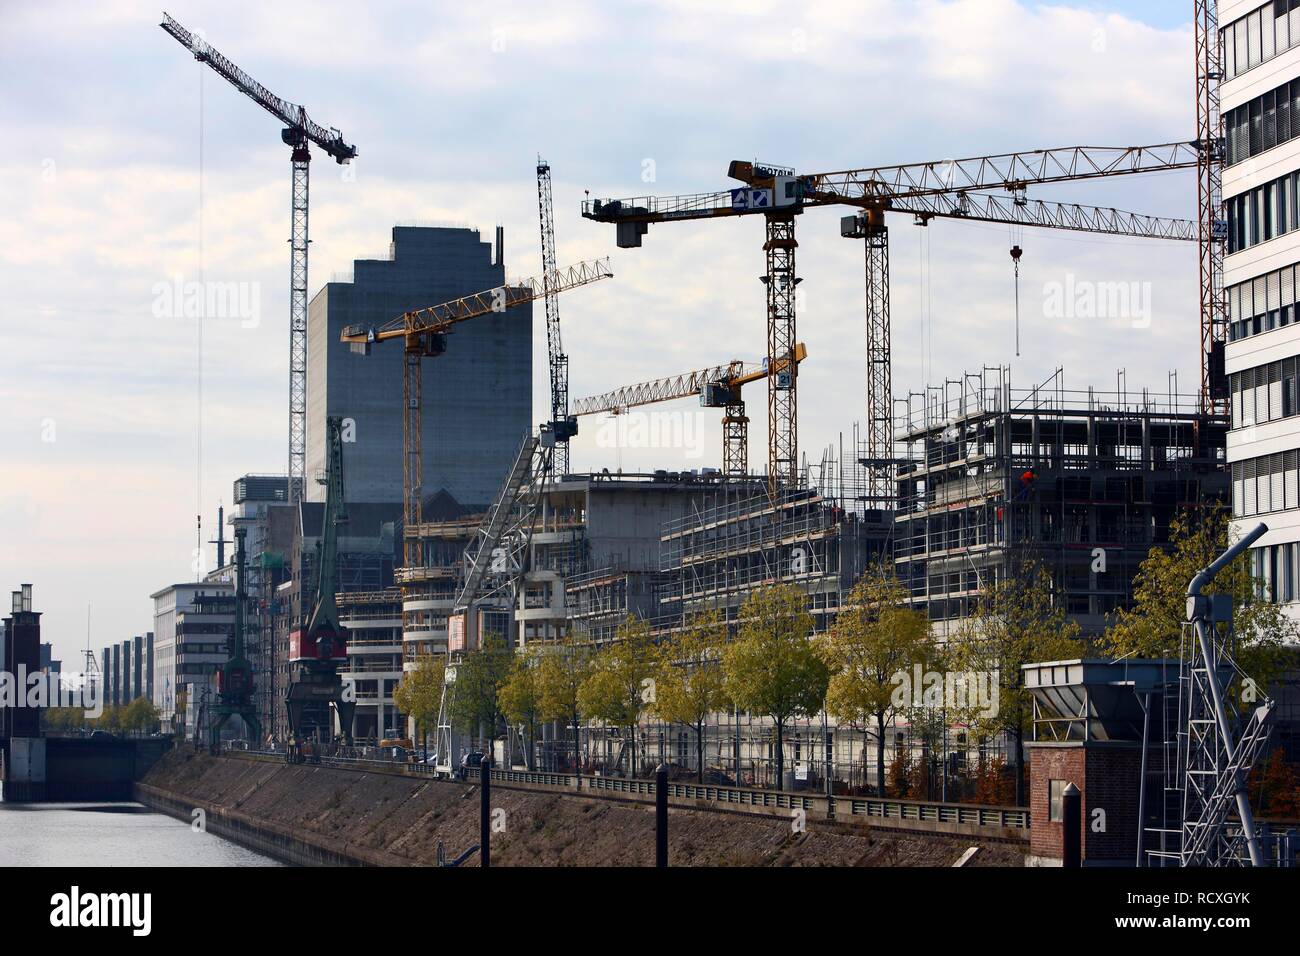 Major construction site, Landesarchiv NRW, North Rhine-Westphalia State Archive, Germany's largest archive building Stock Photo